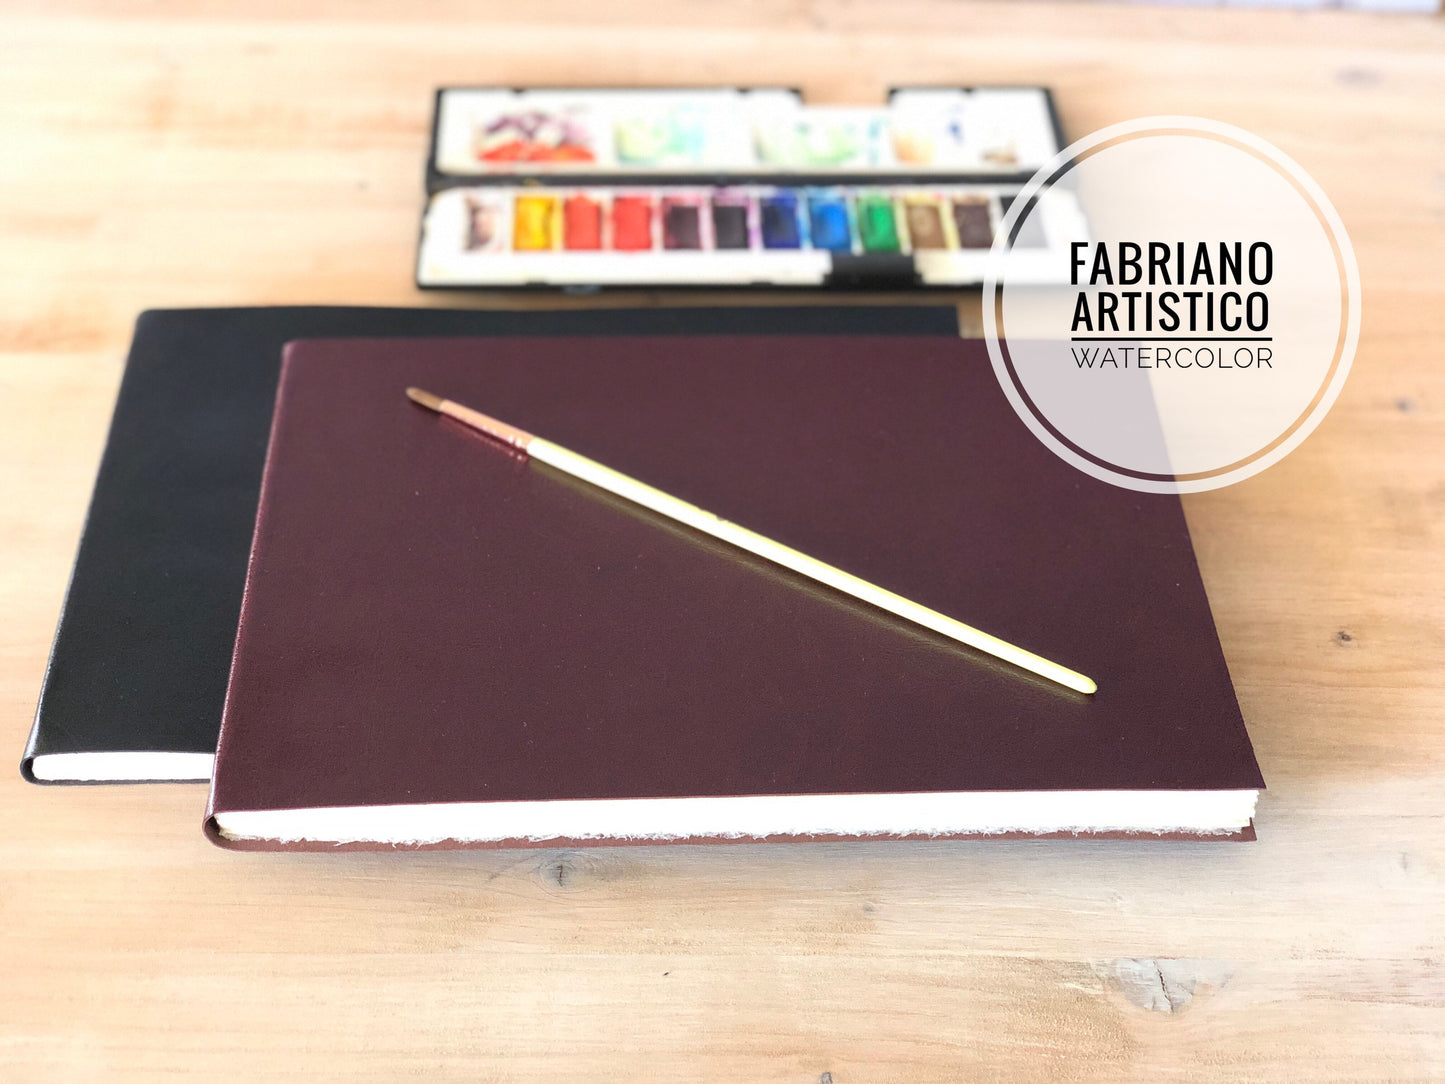 Large Pl Leather Sketchbook with Cotton Watercolor Paper in Landscape Format,  Softcover Travel Botanical Journal,  Fabriano Fine Arts Paper